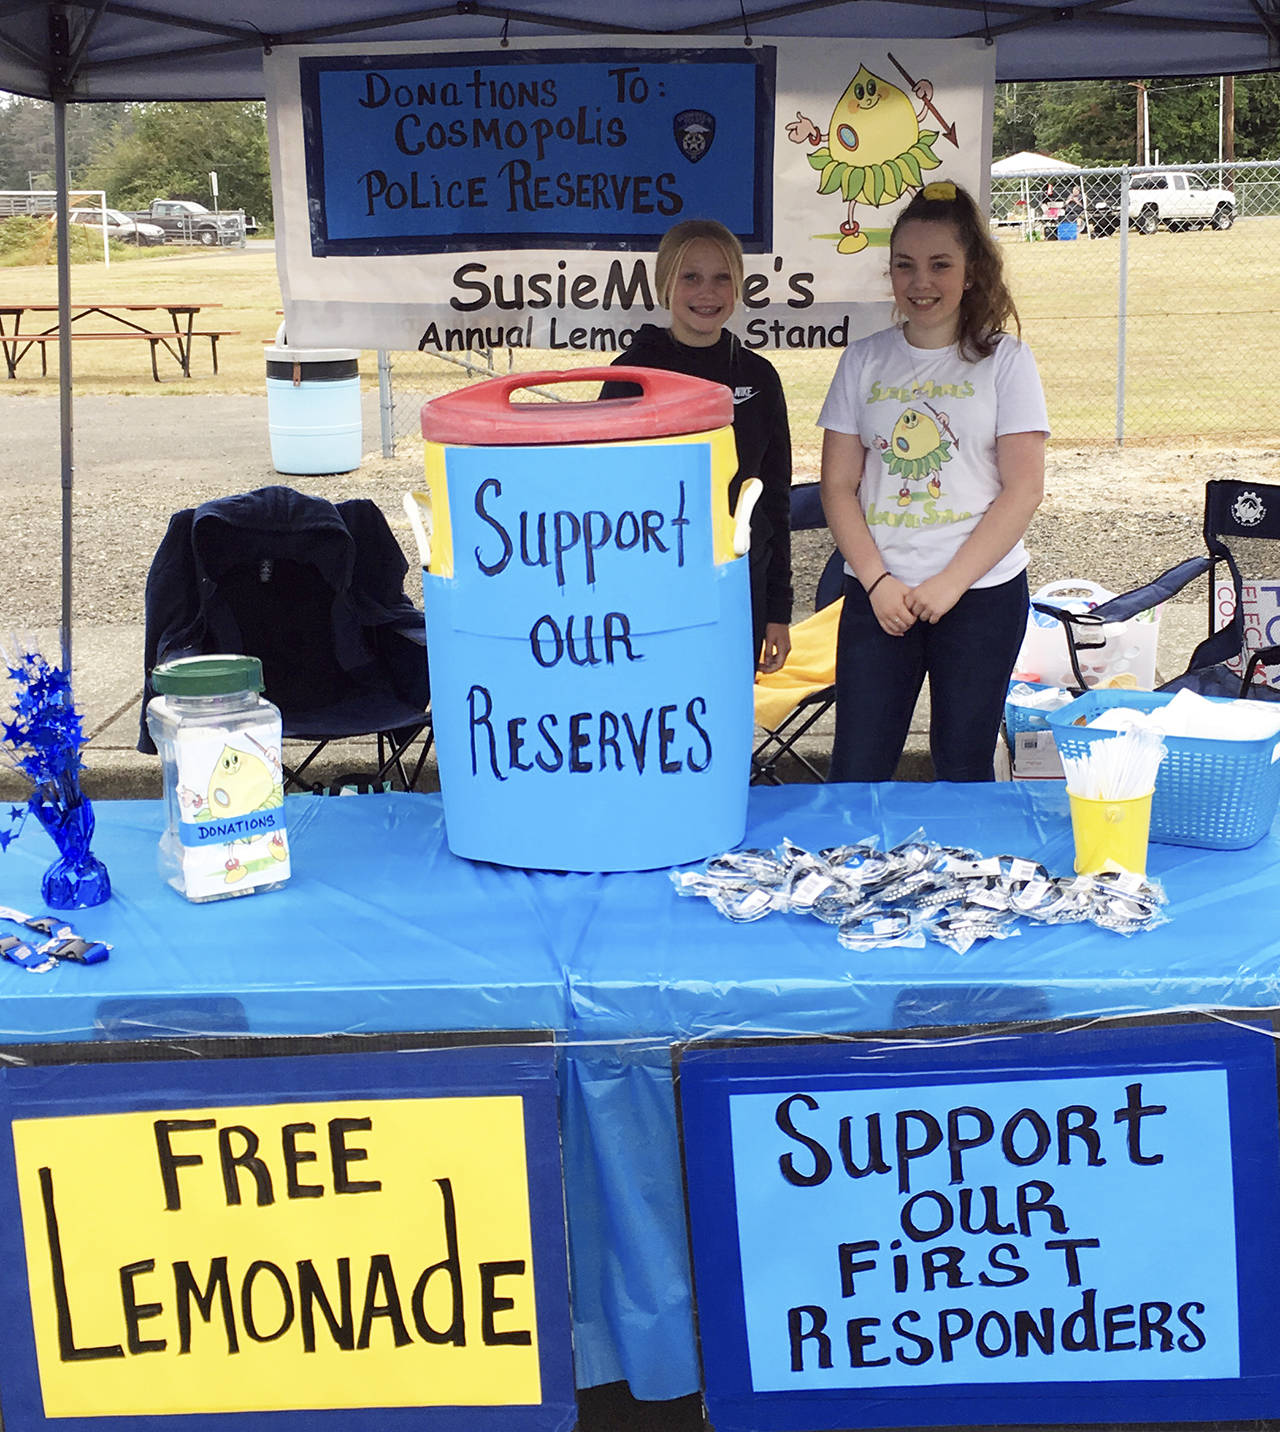 Courtesy photo                                SusieMarie’s Lemonade Stand, an annual fundraiser, pulled in nearly $2,200 Aug. 18 during the Festival in the Park in Cosmopolis. About $1,700 went to the Cosmopolis Police Department Reserves, and $500 went to the Cosmopolis Volunteer Fire Department. Pictured are SusieMarie Brenenstahl (at right) and Zoe Vessey, who helped run the stand this year. Next year, the 14th annual Lemonade Stand will be SusieMarie’s senior project — and it will be the last one, according to her grandmother, Ann Peery.